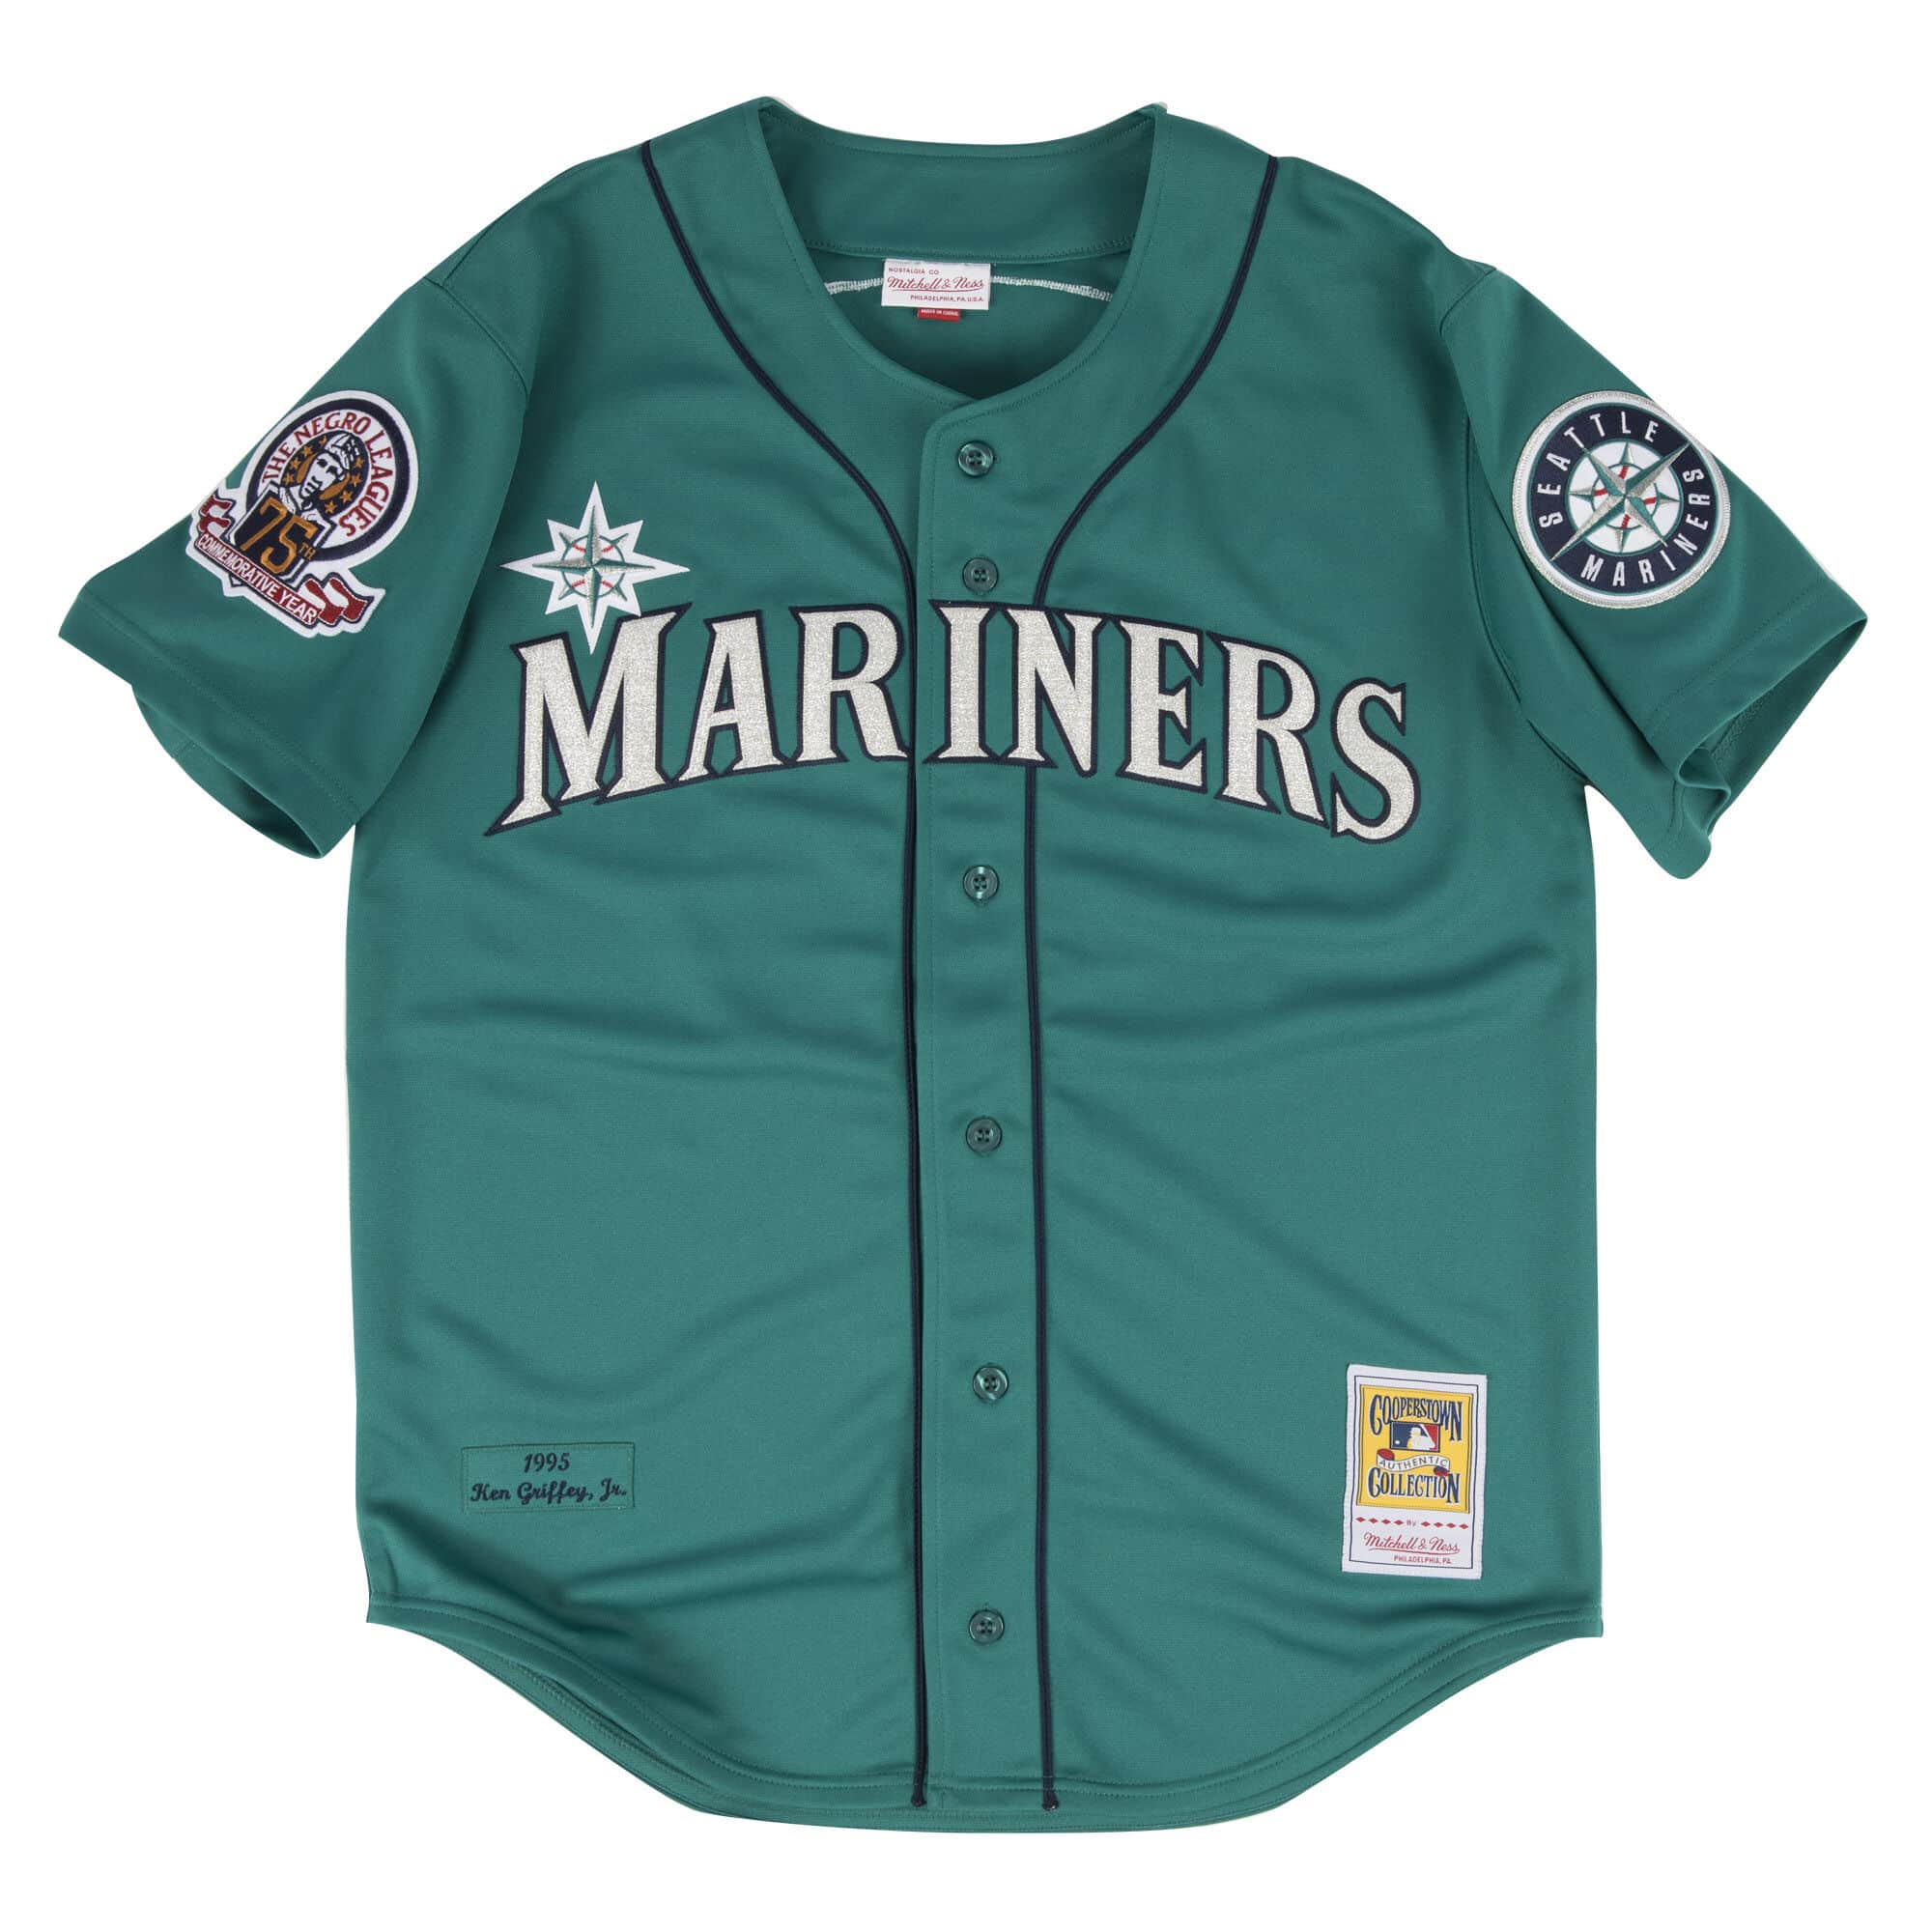 cooperstown collection ken griffey jr jersey